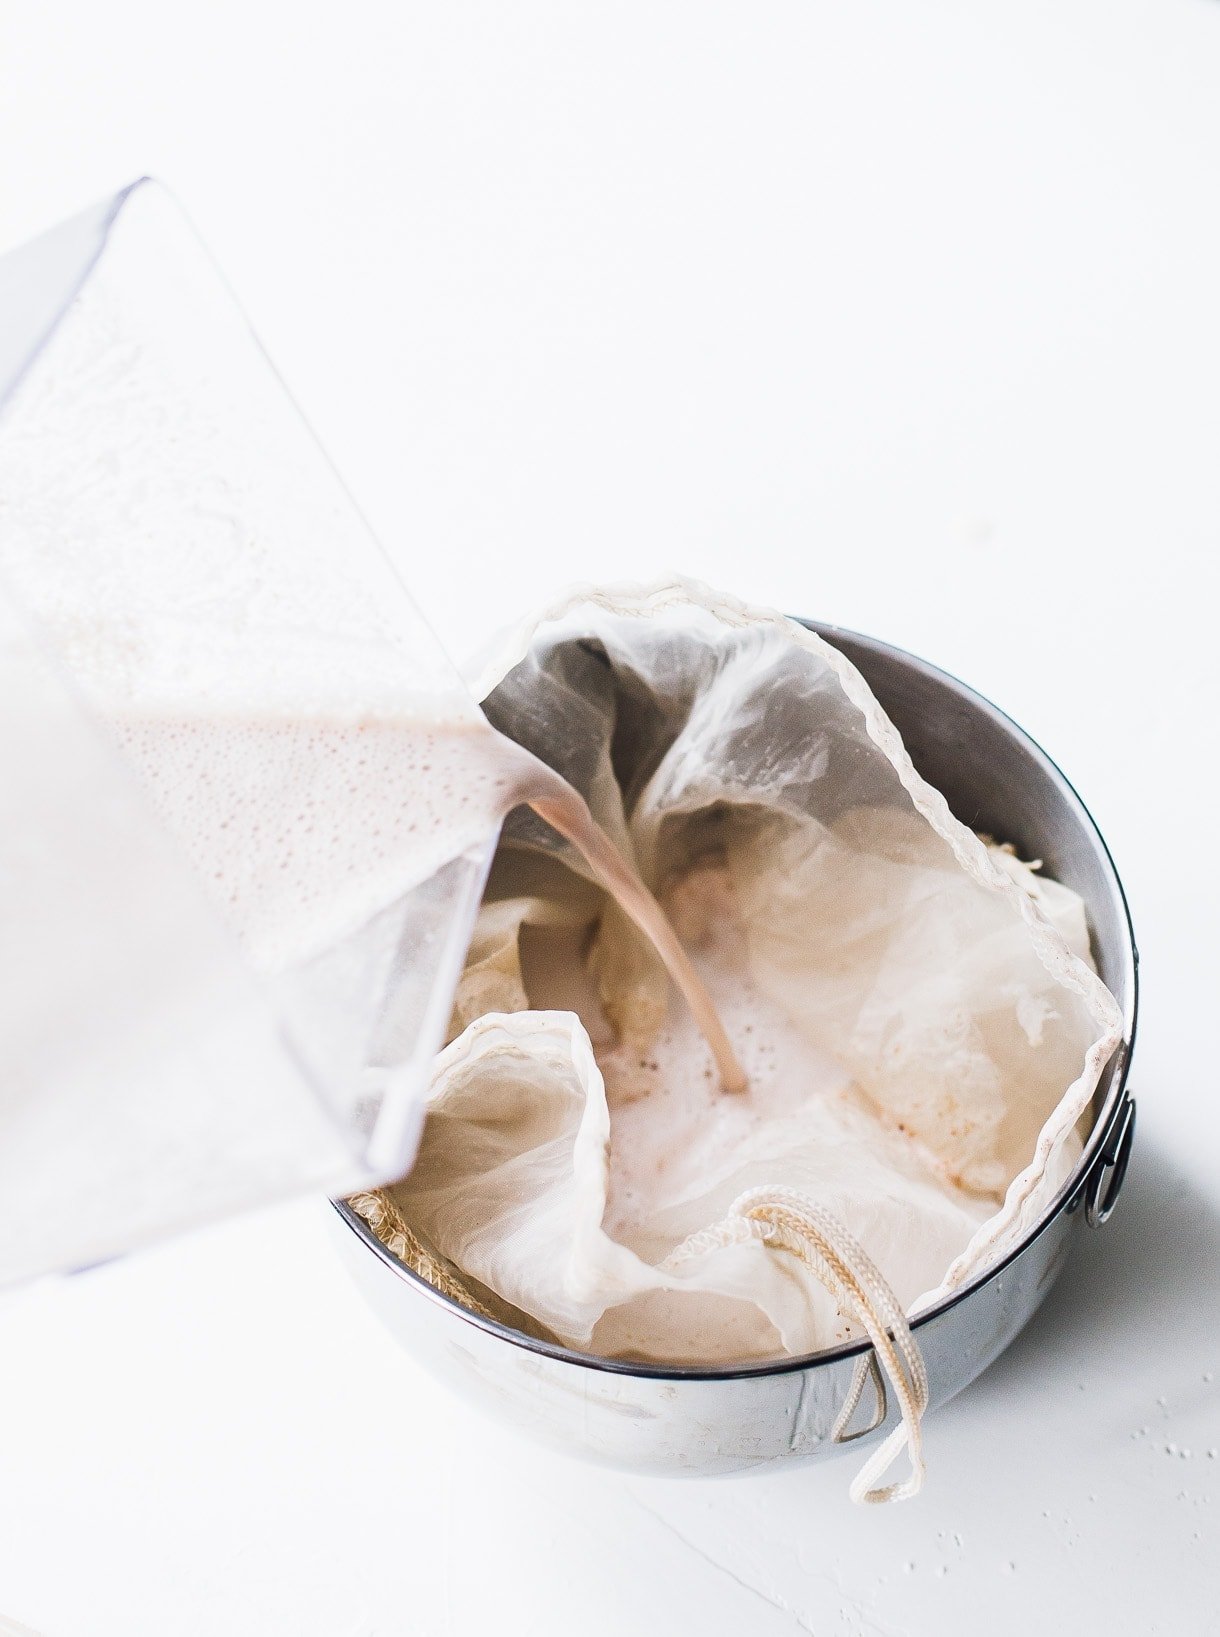 HOW TO MAKE ANY HOMEMADE NUT MILK, with easy step-by-step instructions